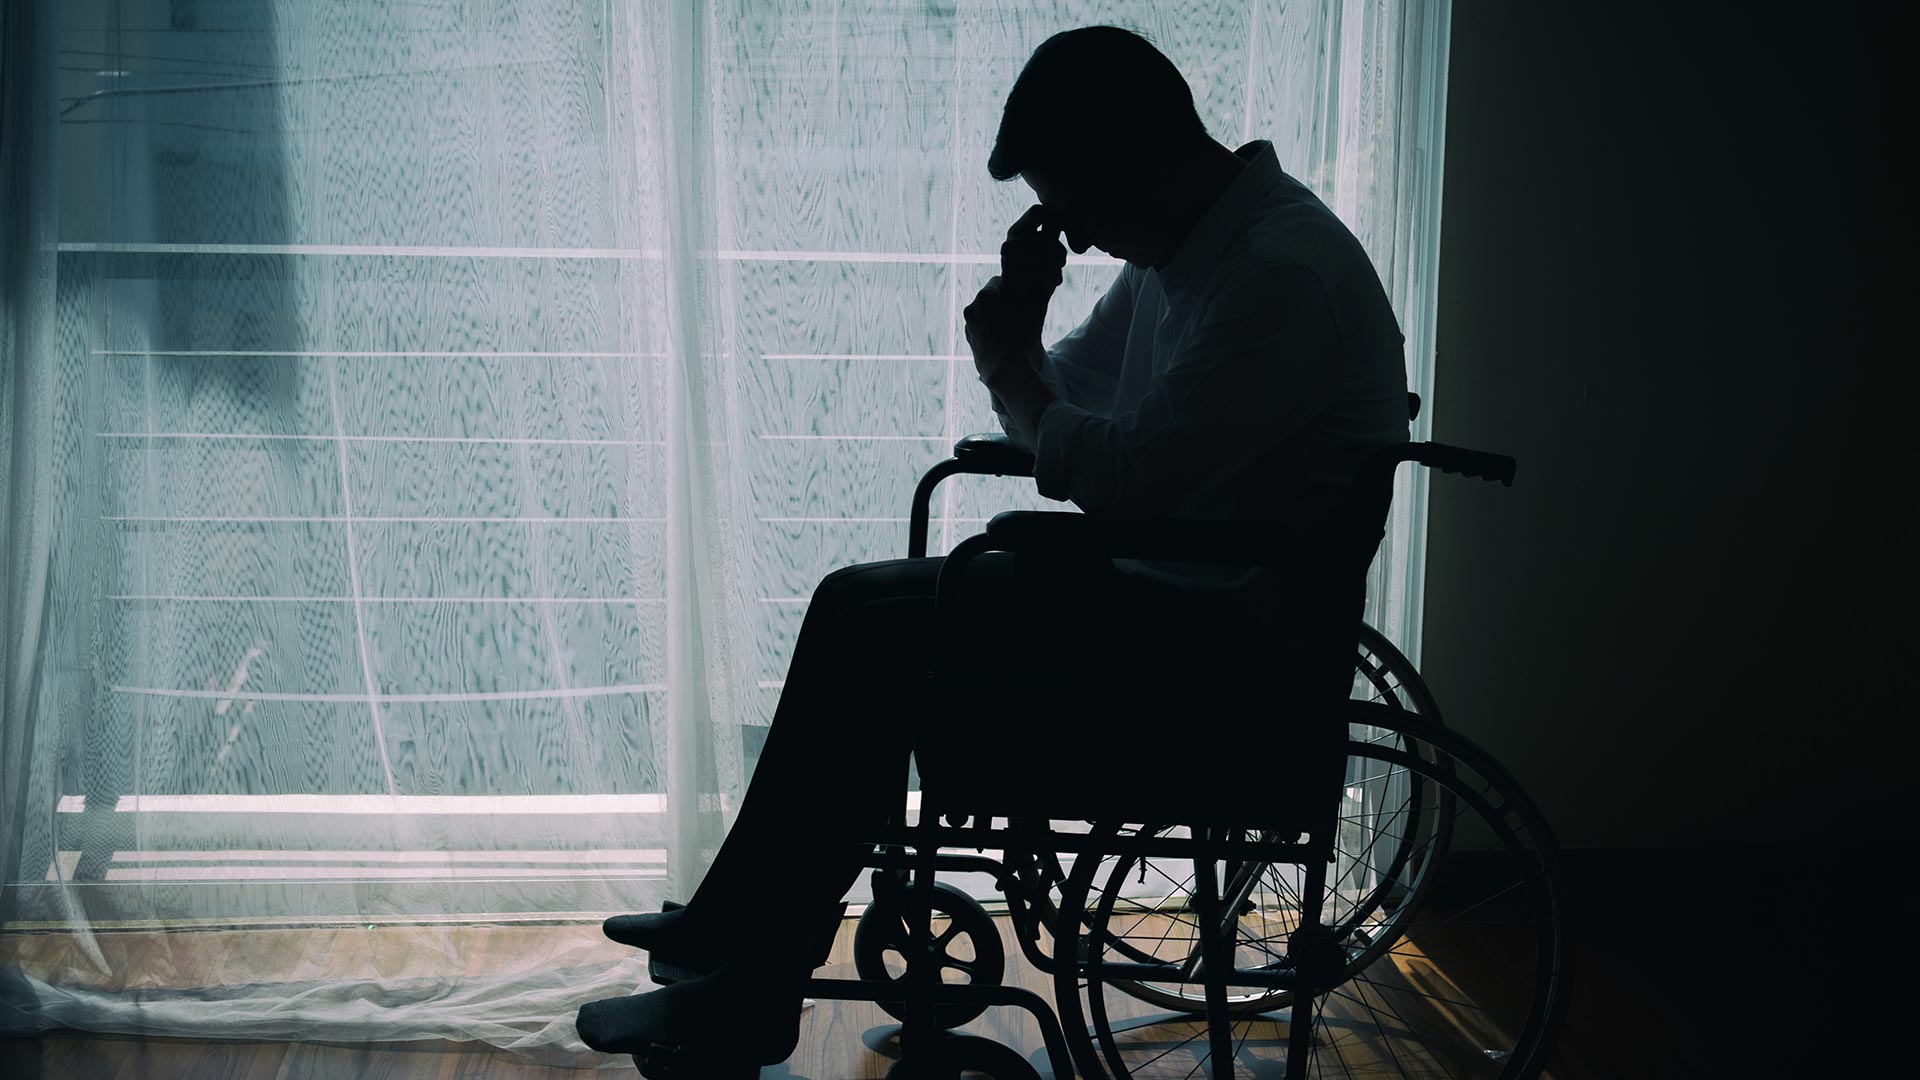 Side profile image of a NDIS Participant in wheel chair silhouetted by window holding head up with hand